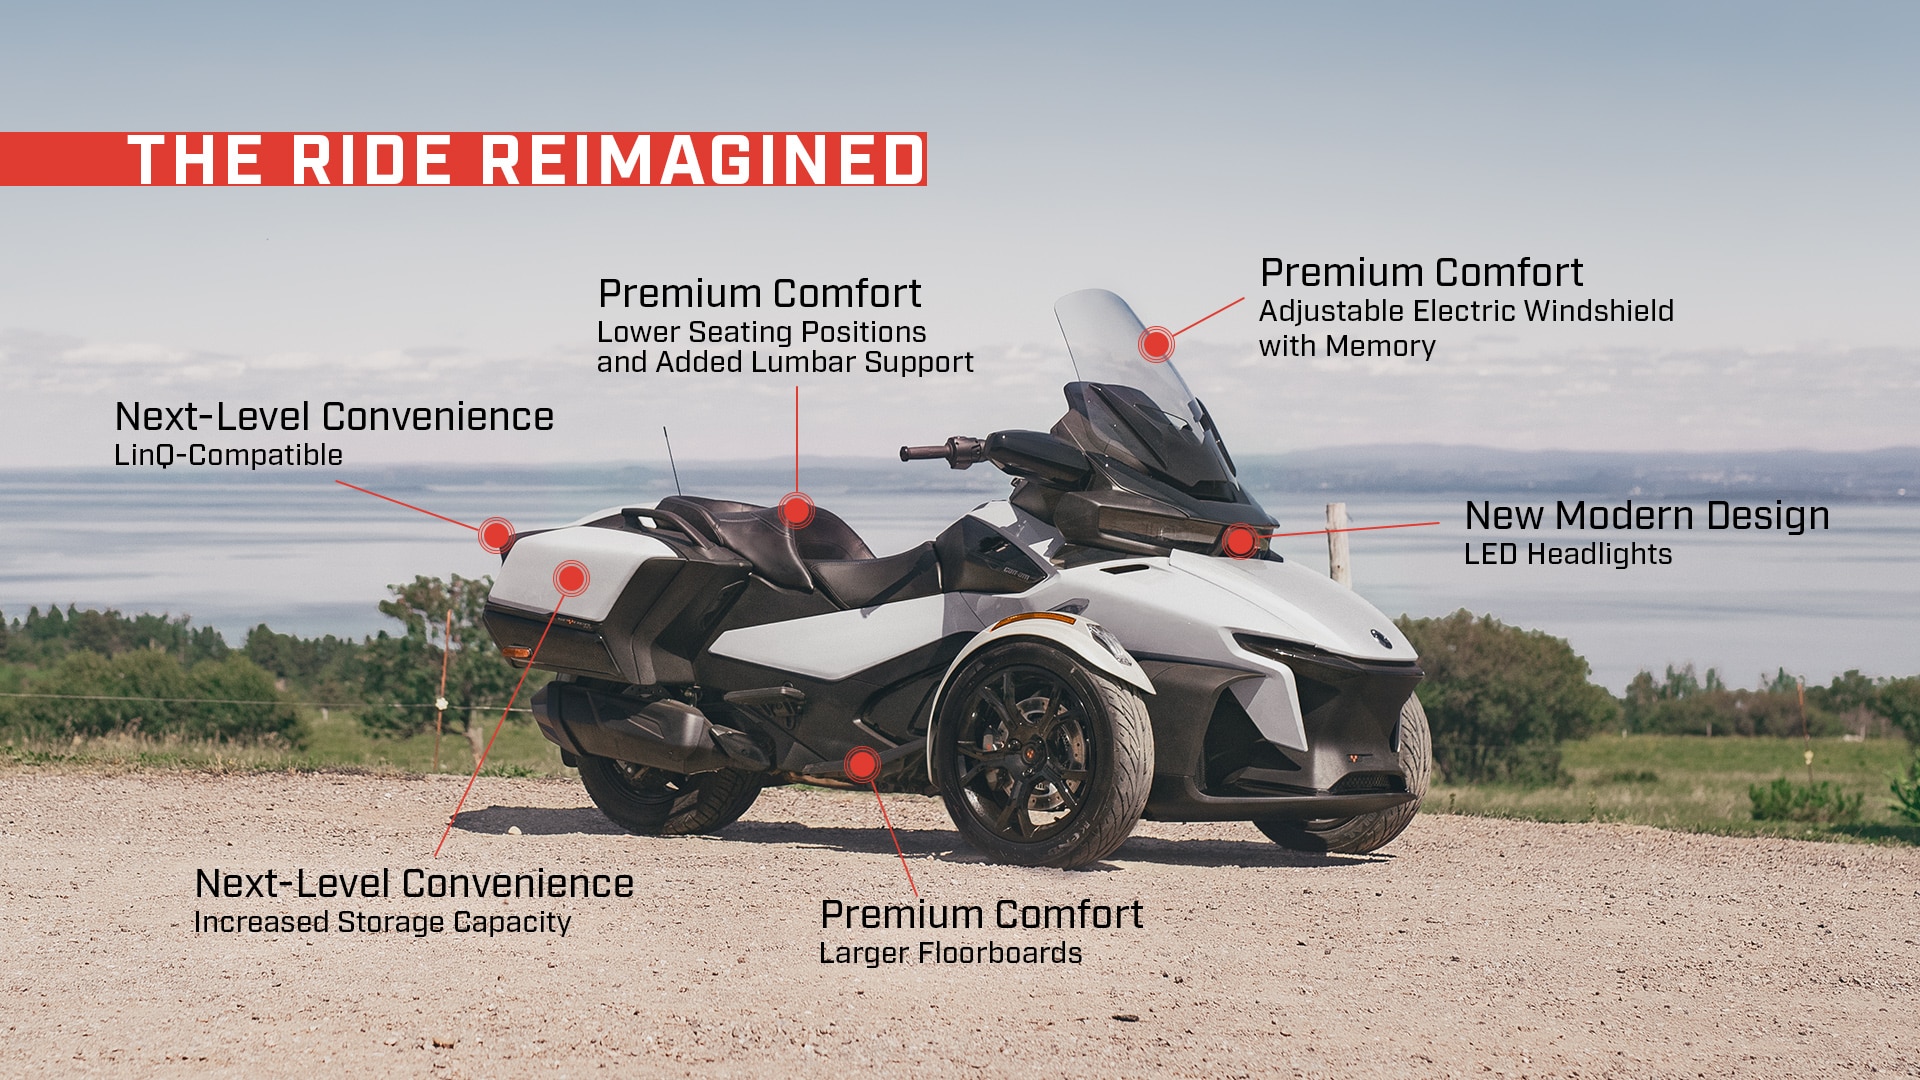 View of a white Can-Am Spyder with riding upgrades